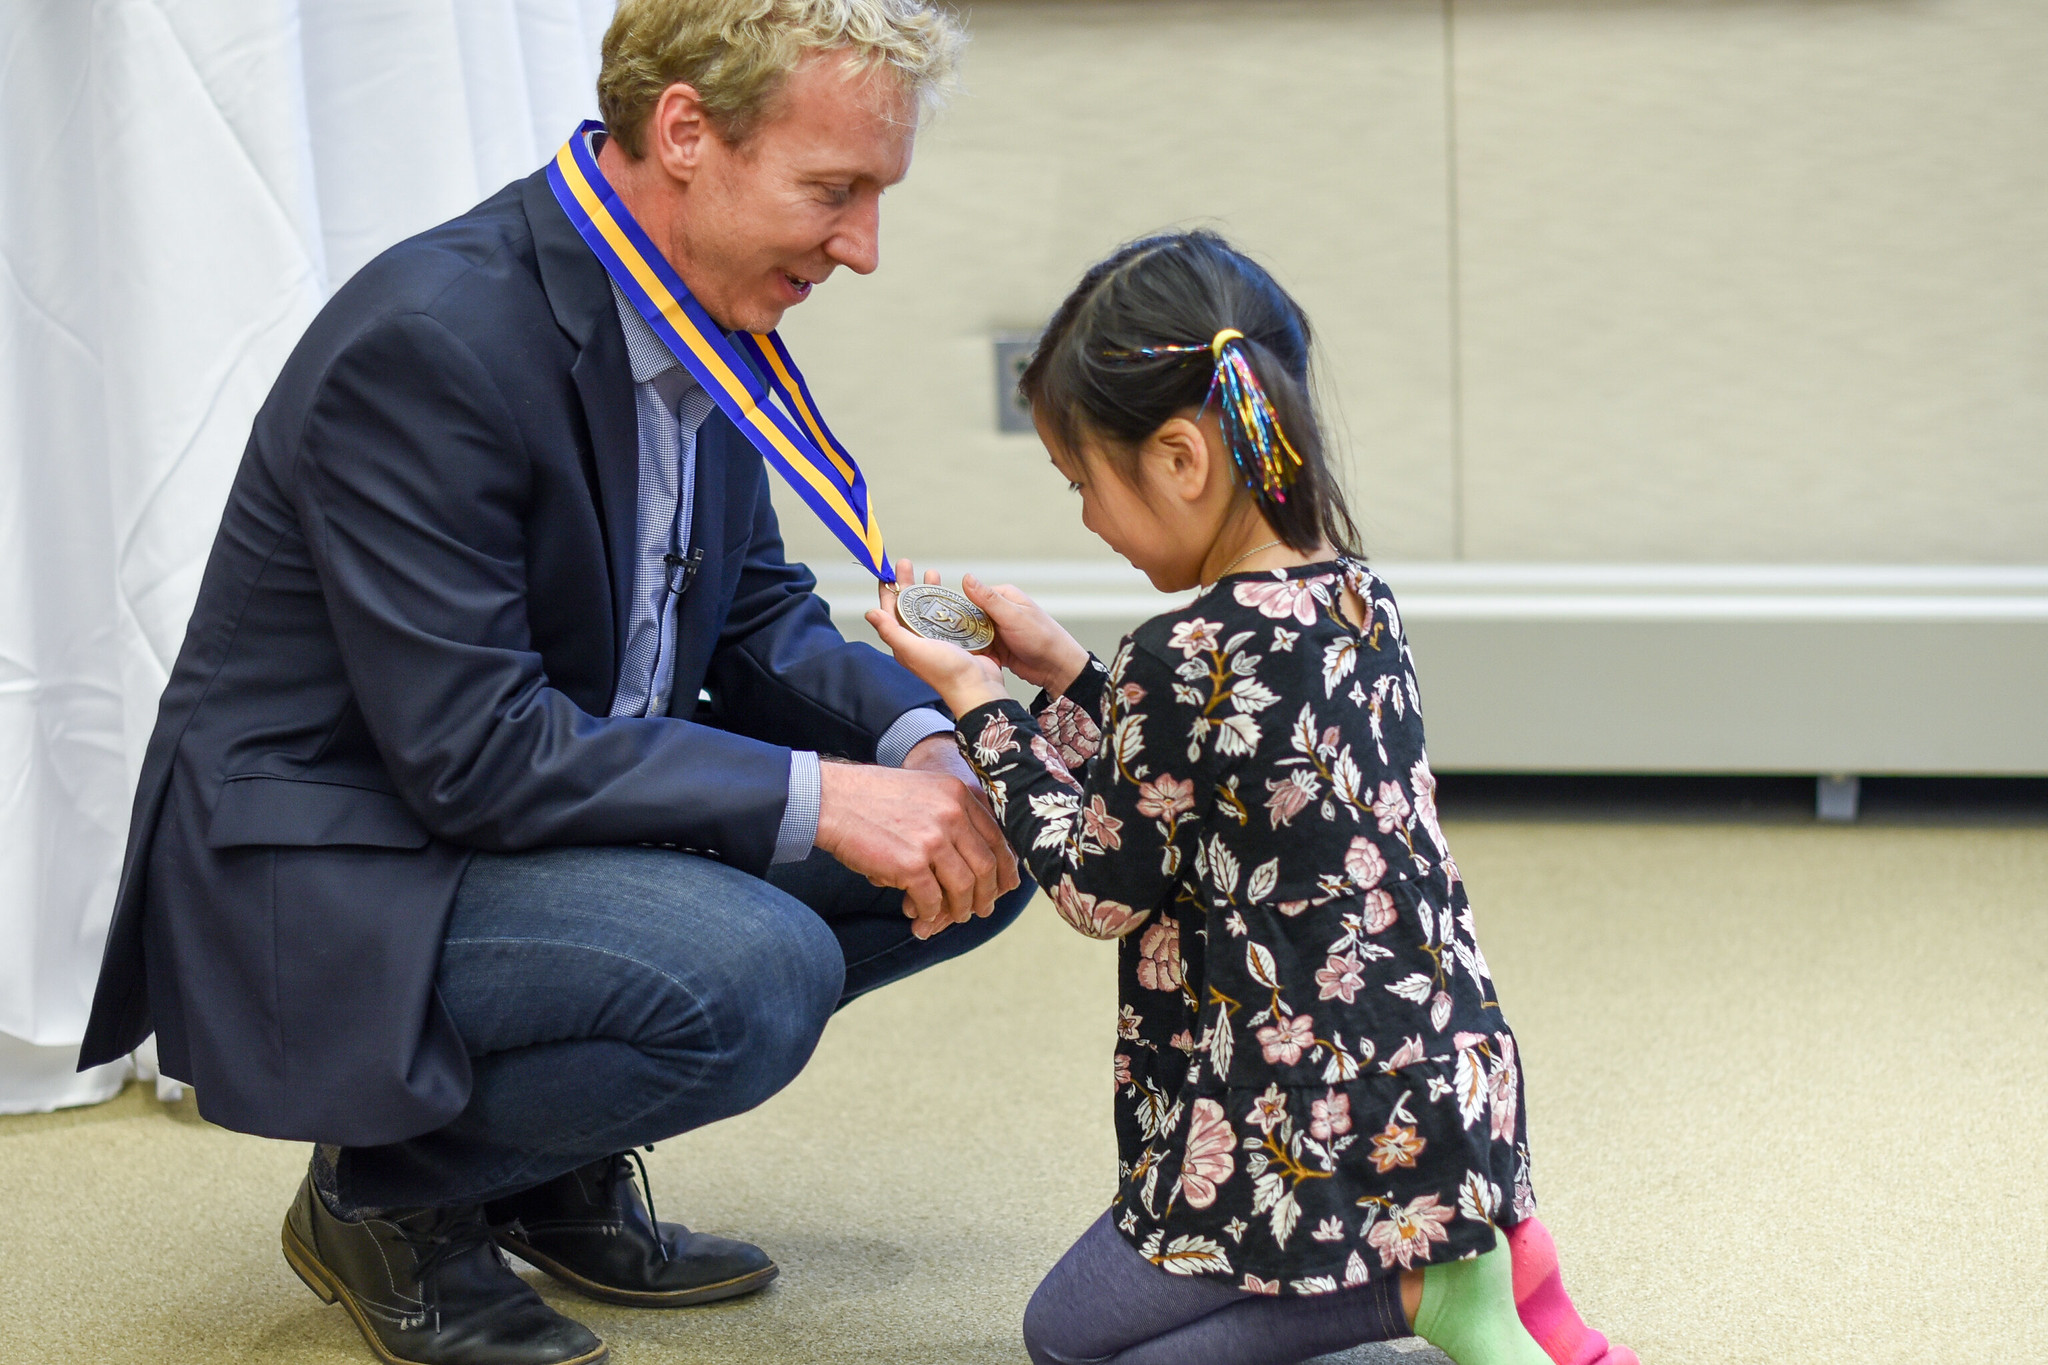 Blaauw kneels so a little girl can inspect his medal